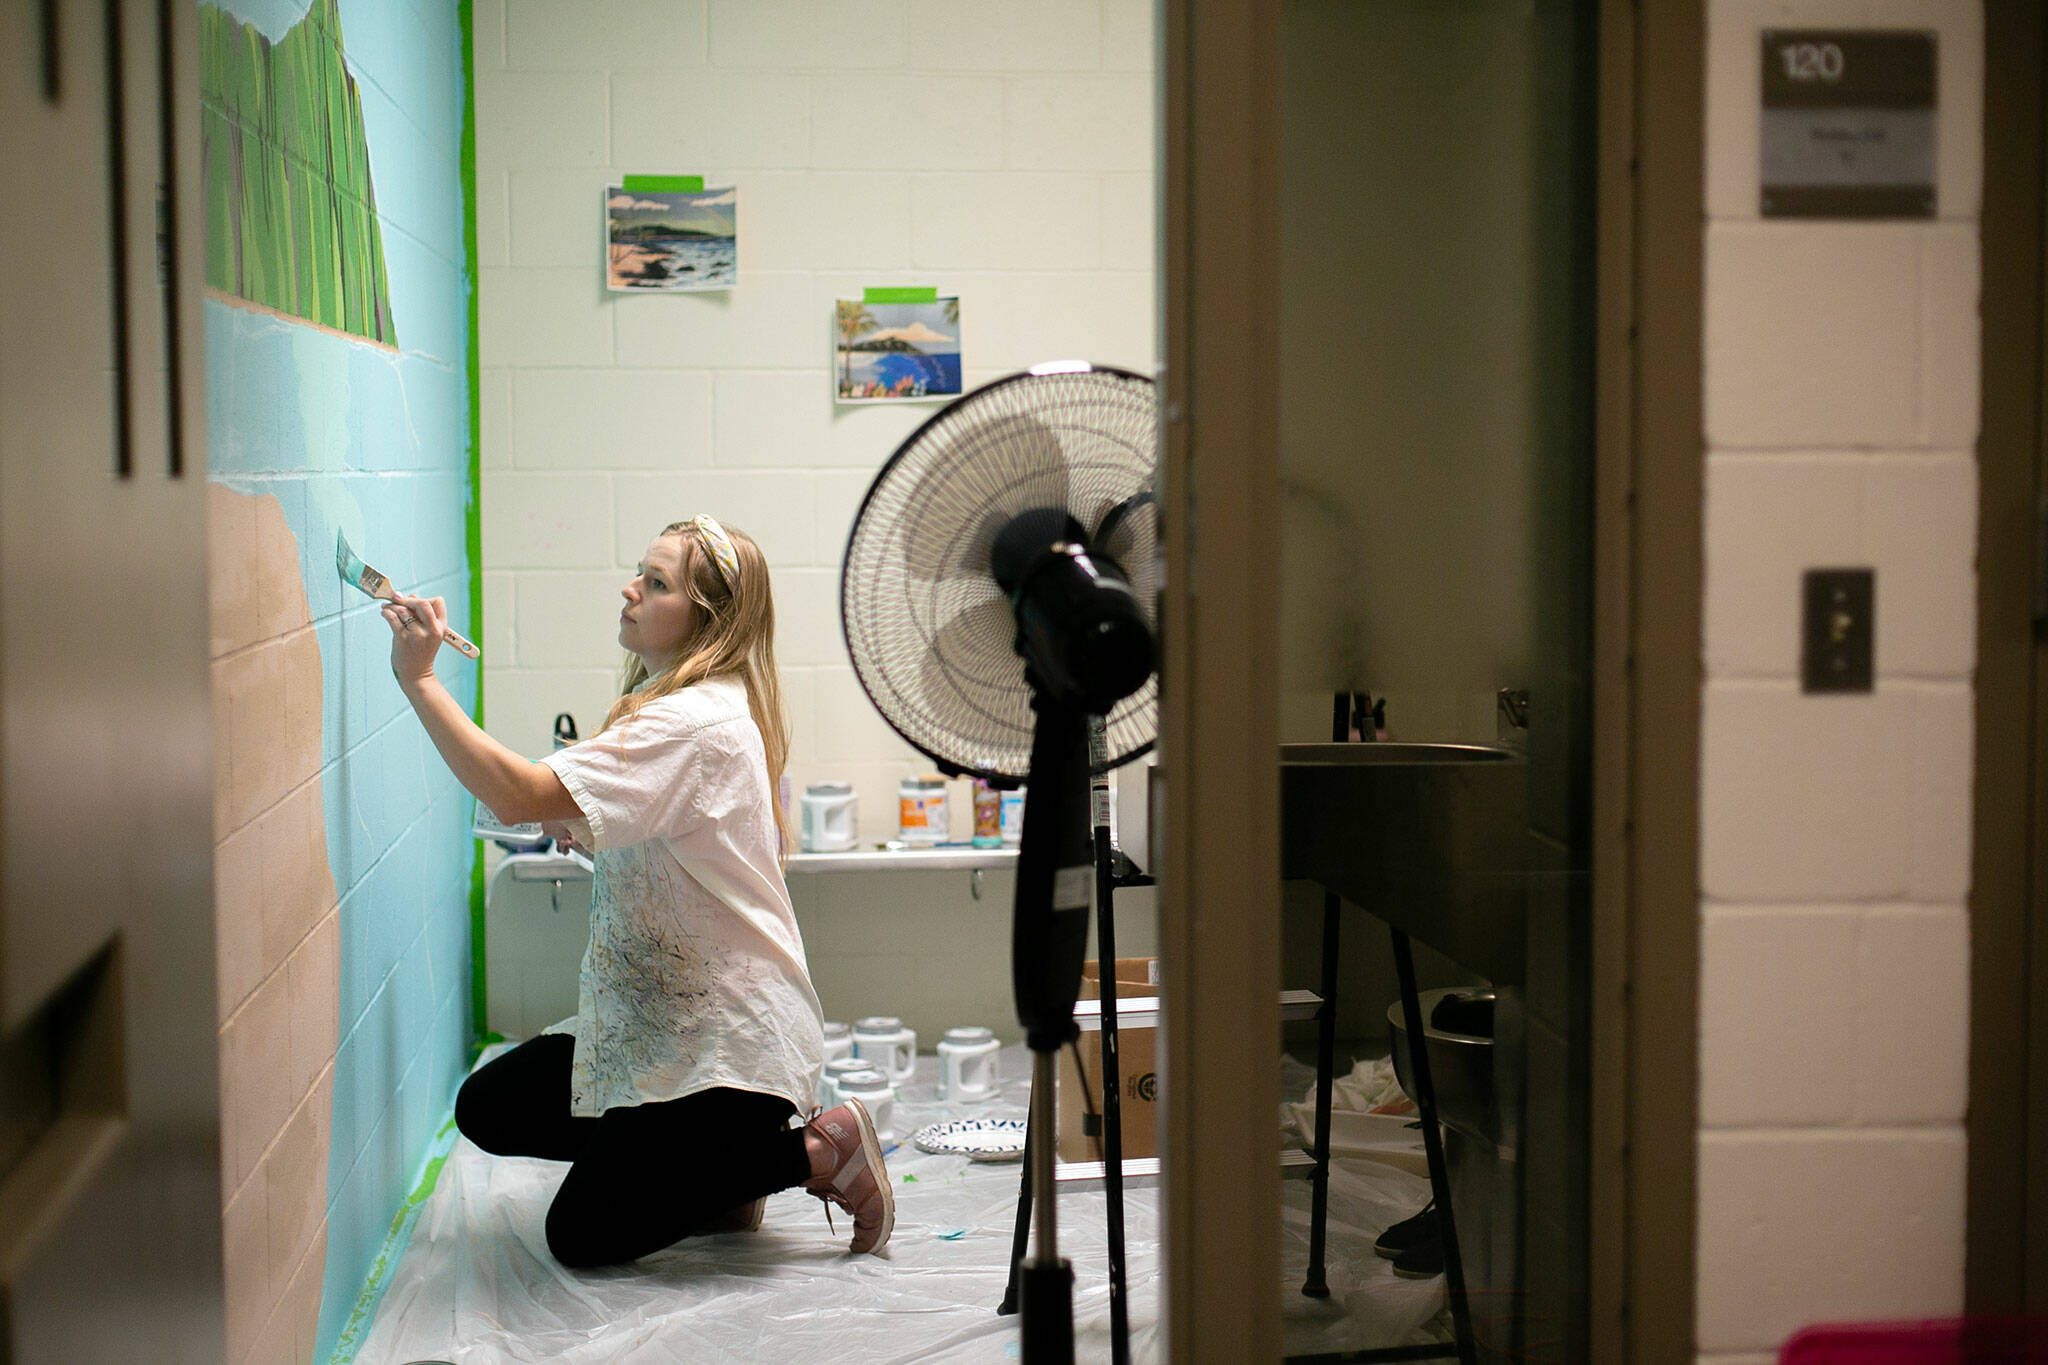 Penny Leslie works on a tropical mural inside one of the jail cells at the Mukilteo Police Station. (Ryan Berry / The Herald)